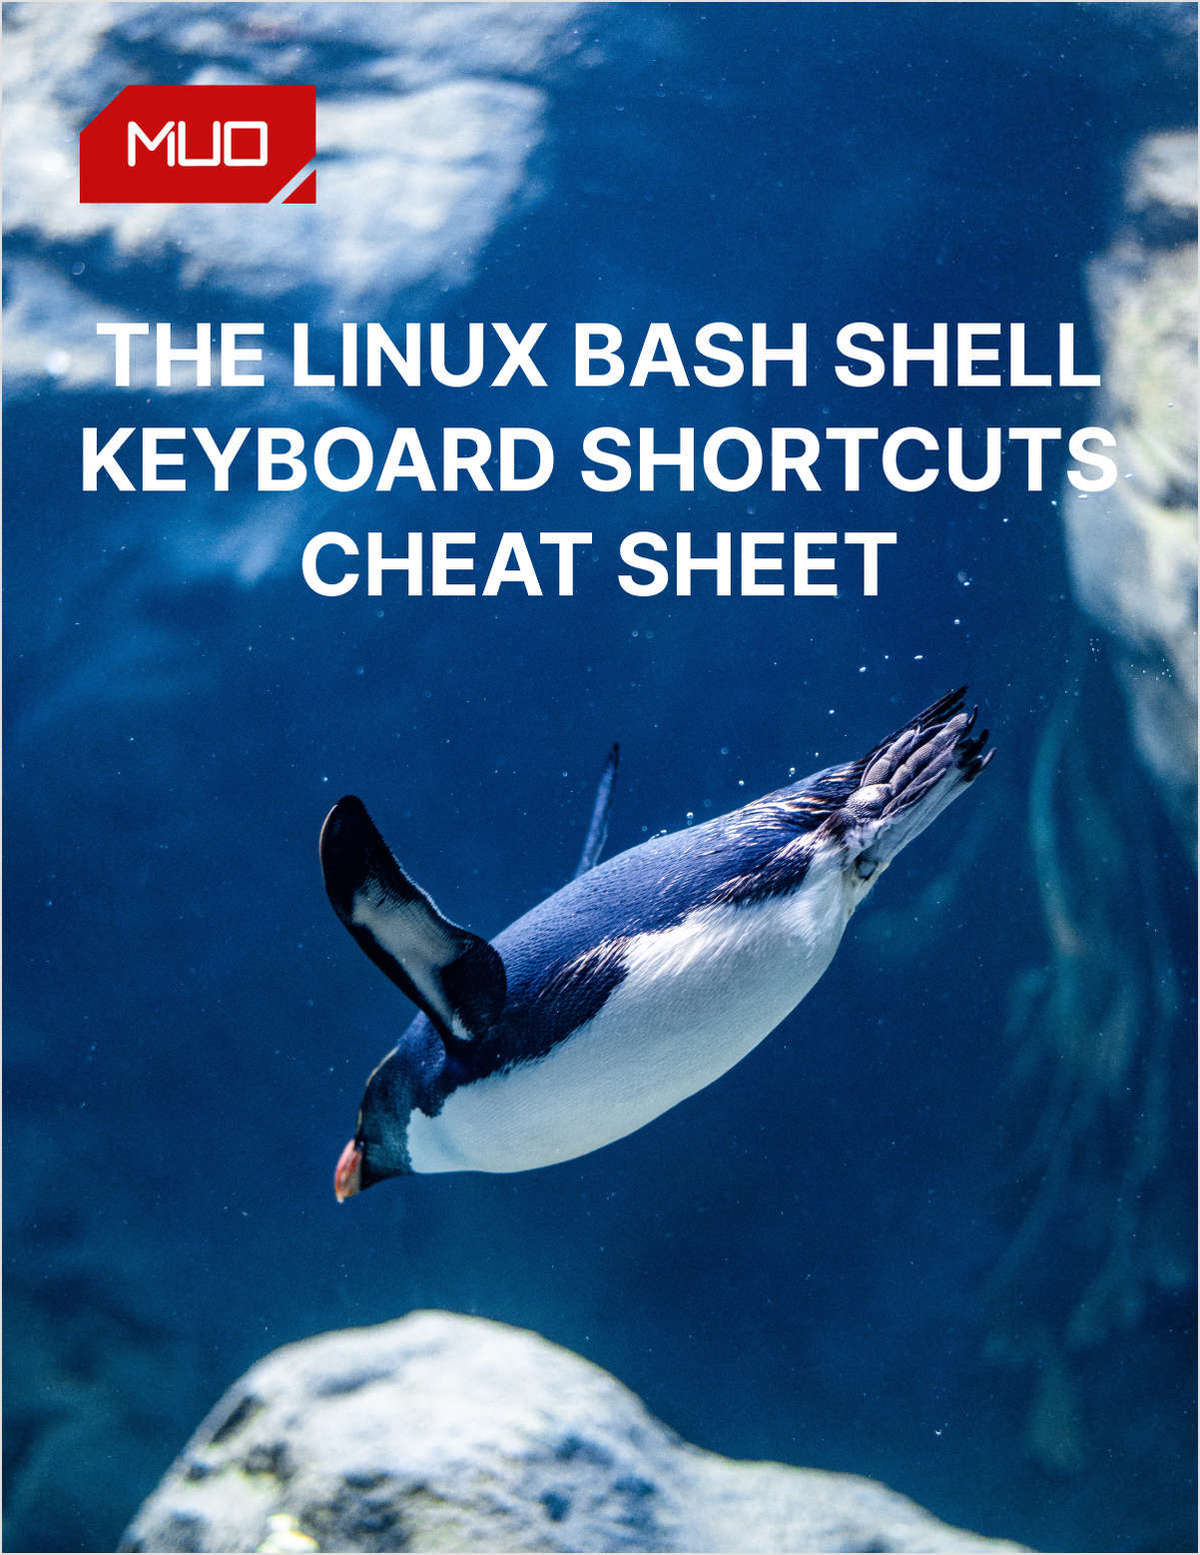 Handy Keyboard Shortcuts for the Linux Bash Terminal